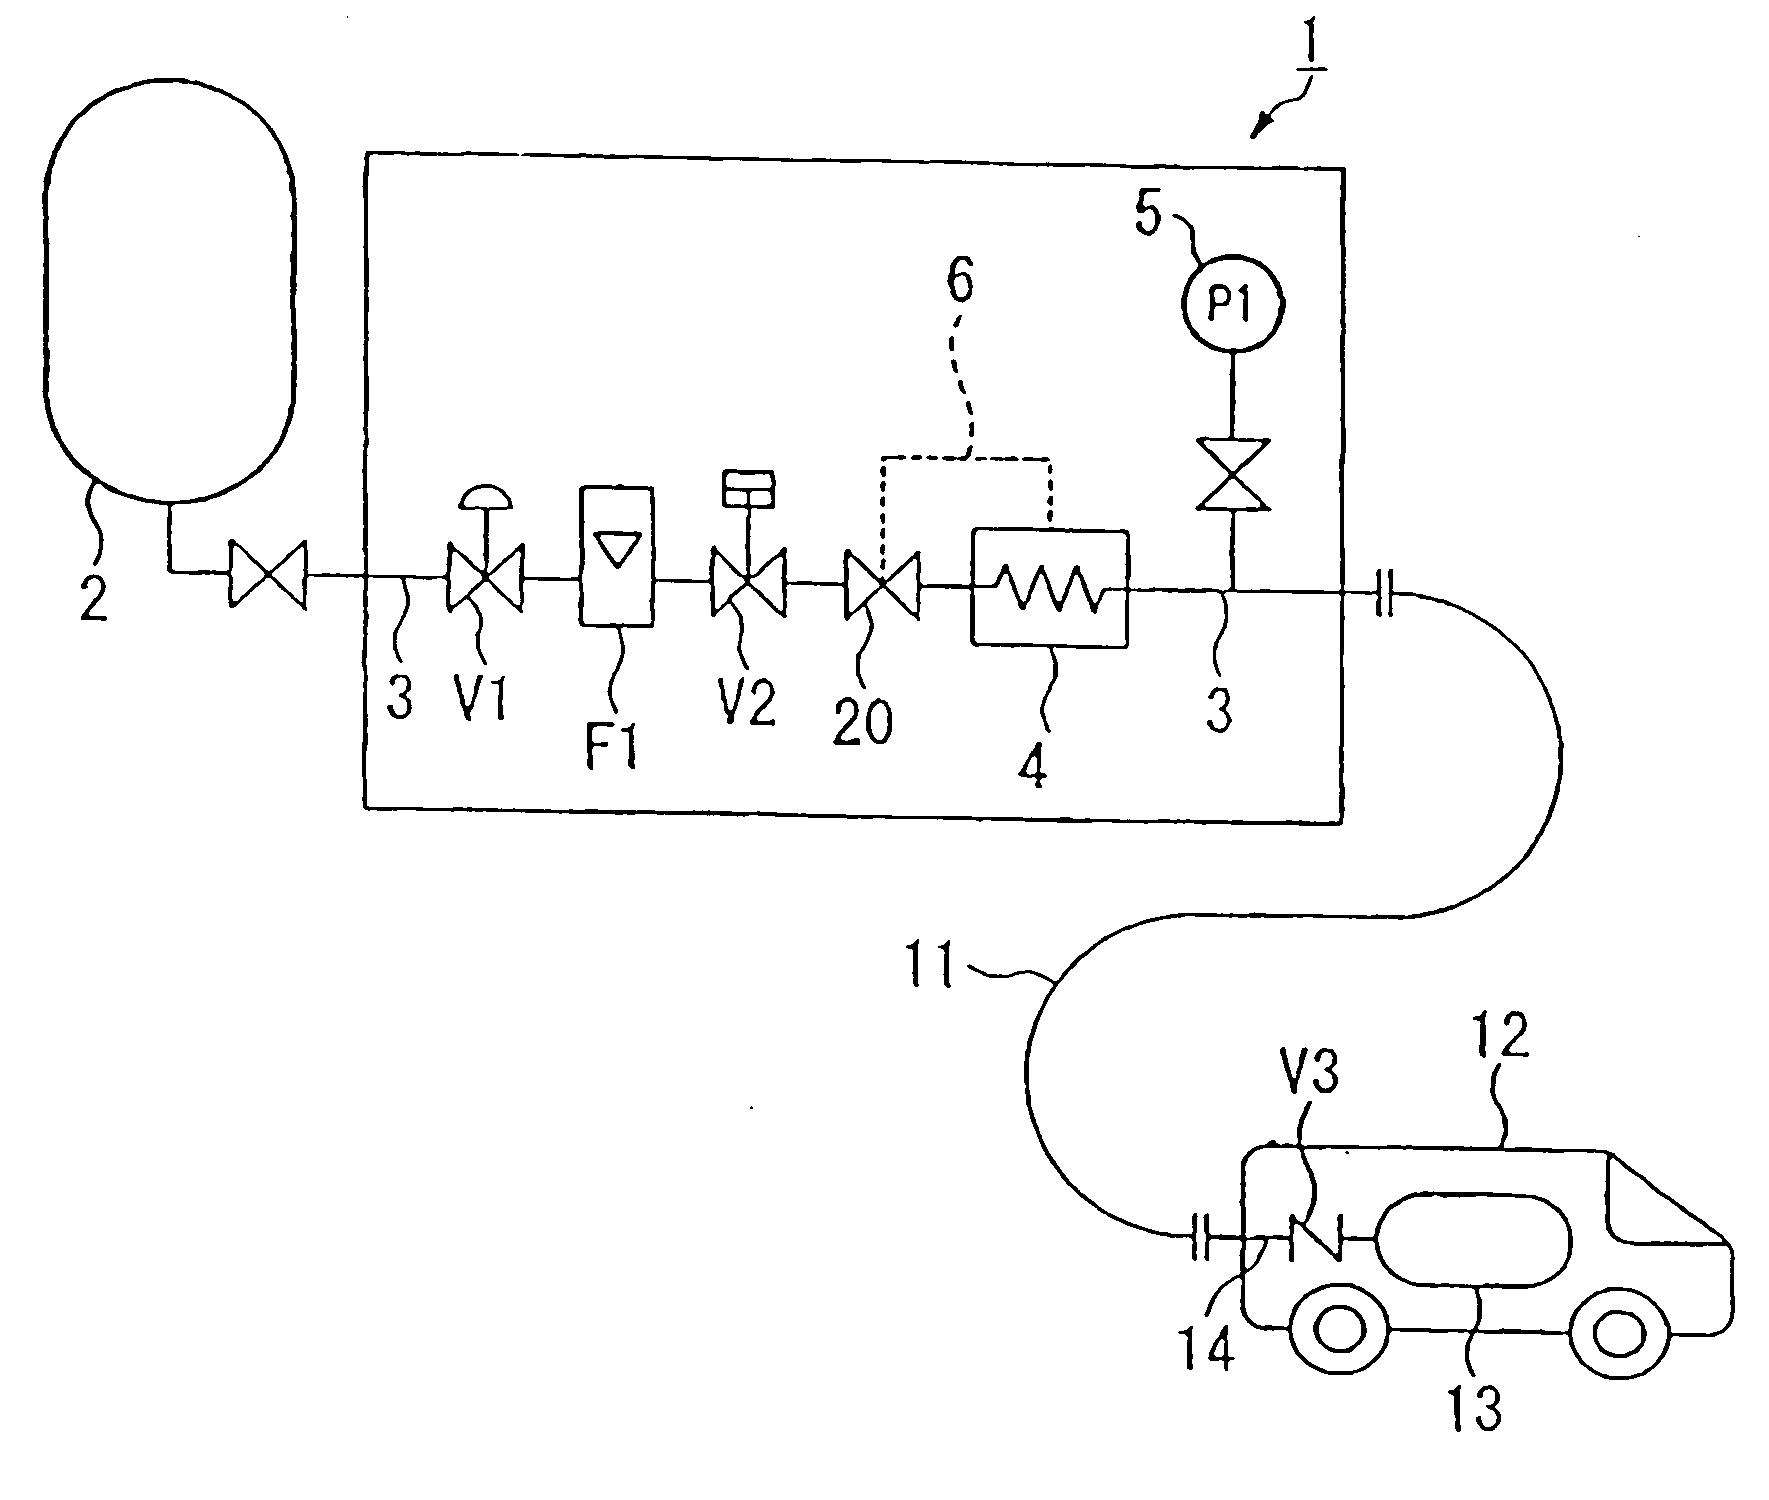 Apparatus and method for filling fuel